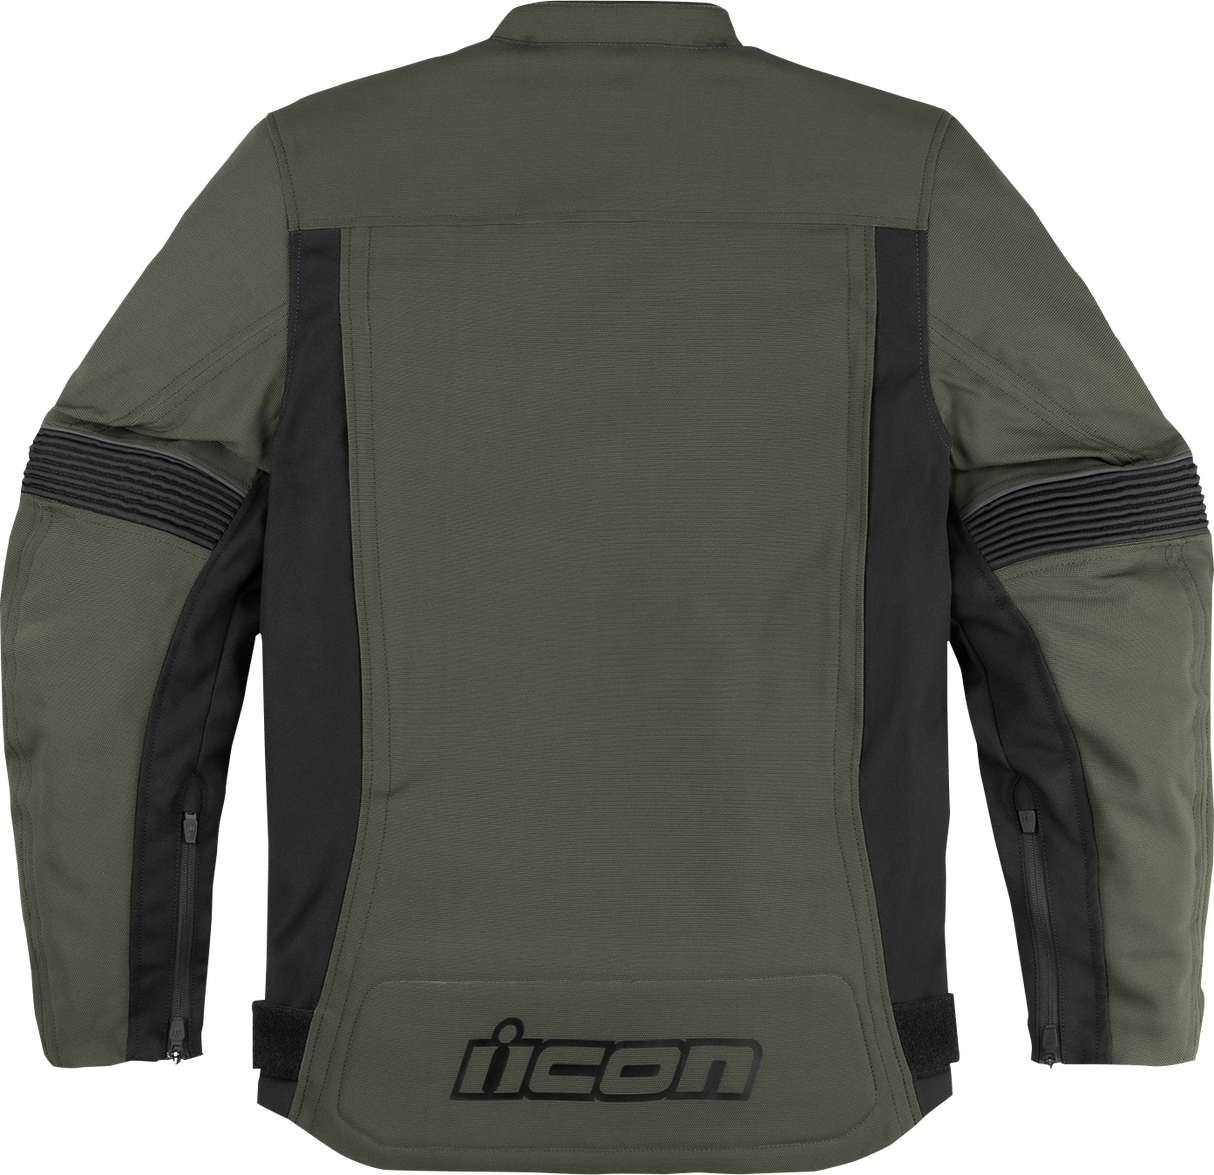 ICON Slabtown Jacket - Green - Small 2820-6261